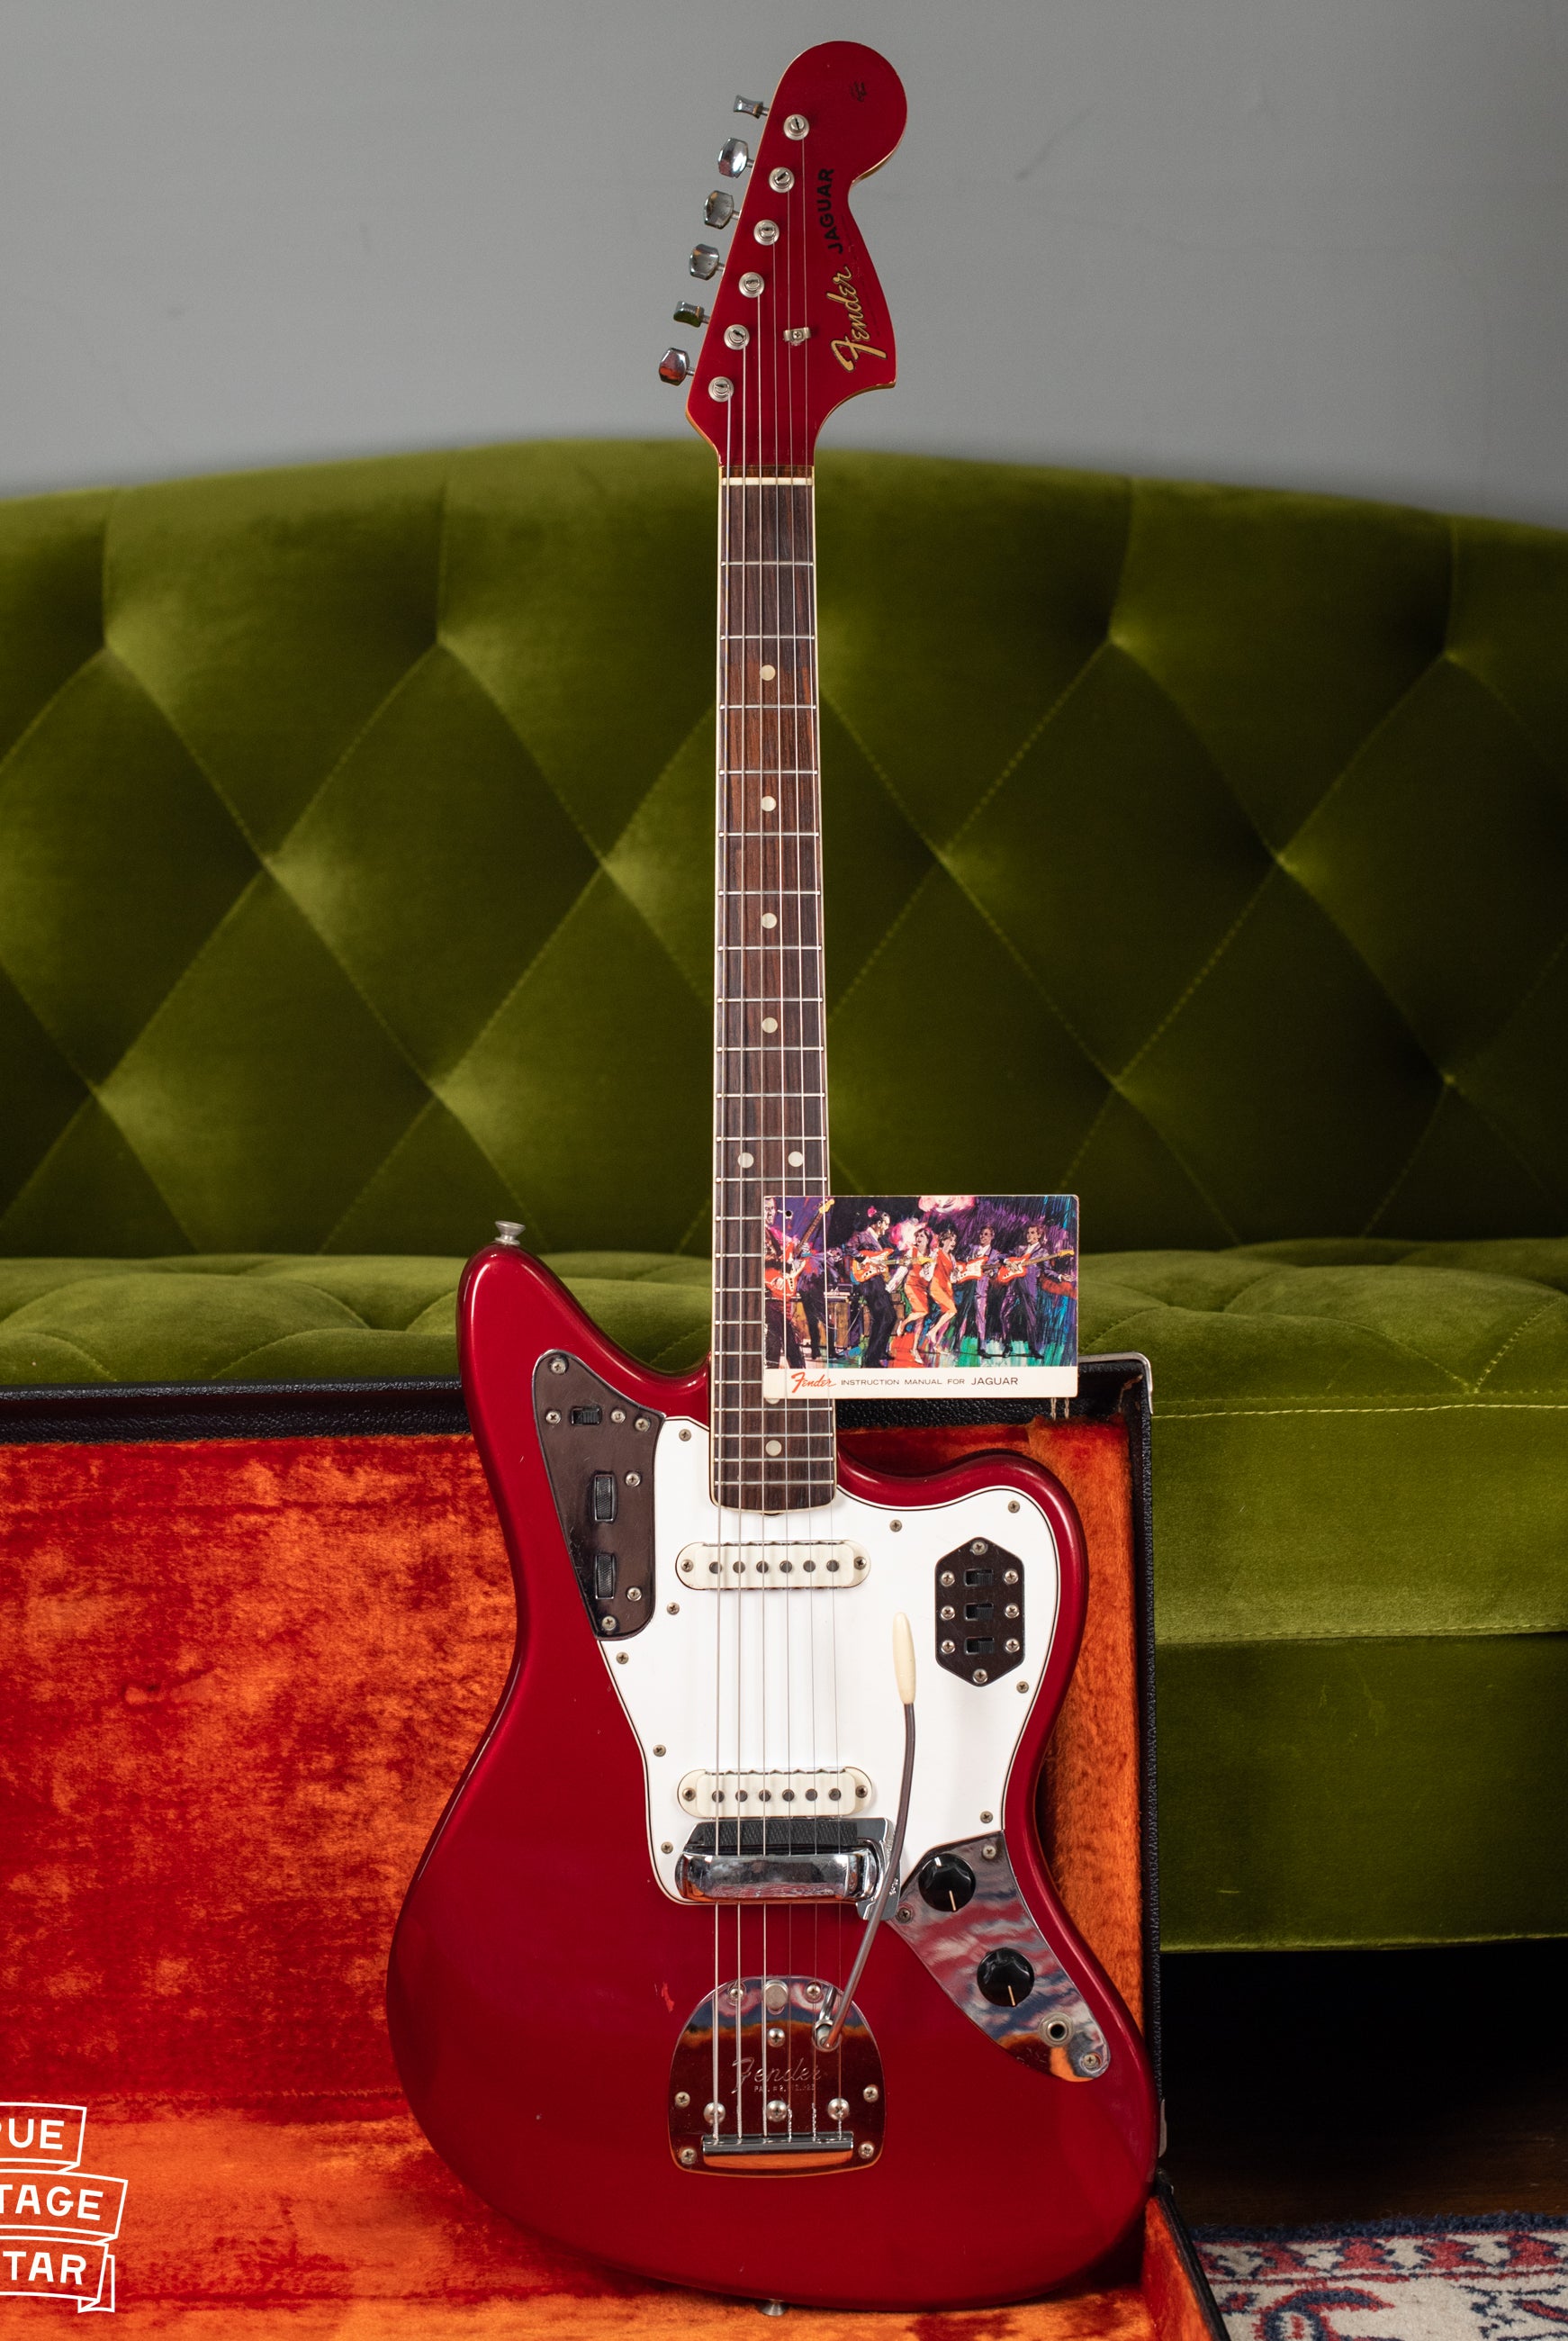 Fender Guitars with Candy Apple Red finish from the 1960s